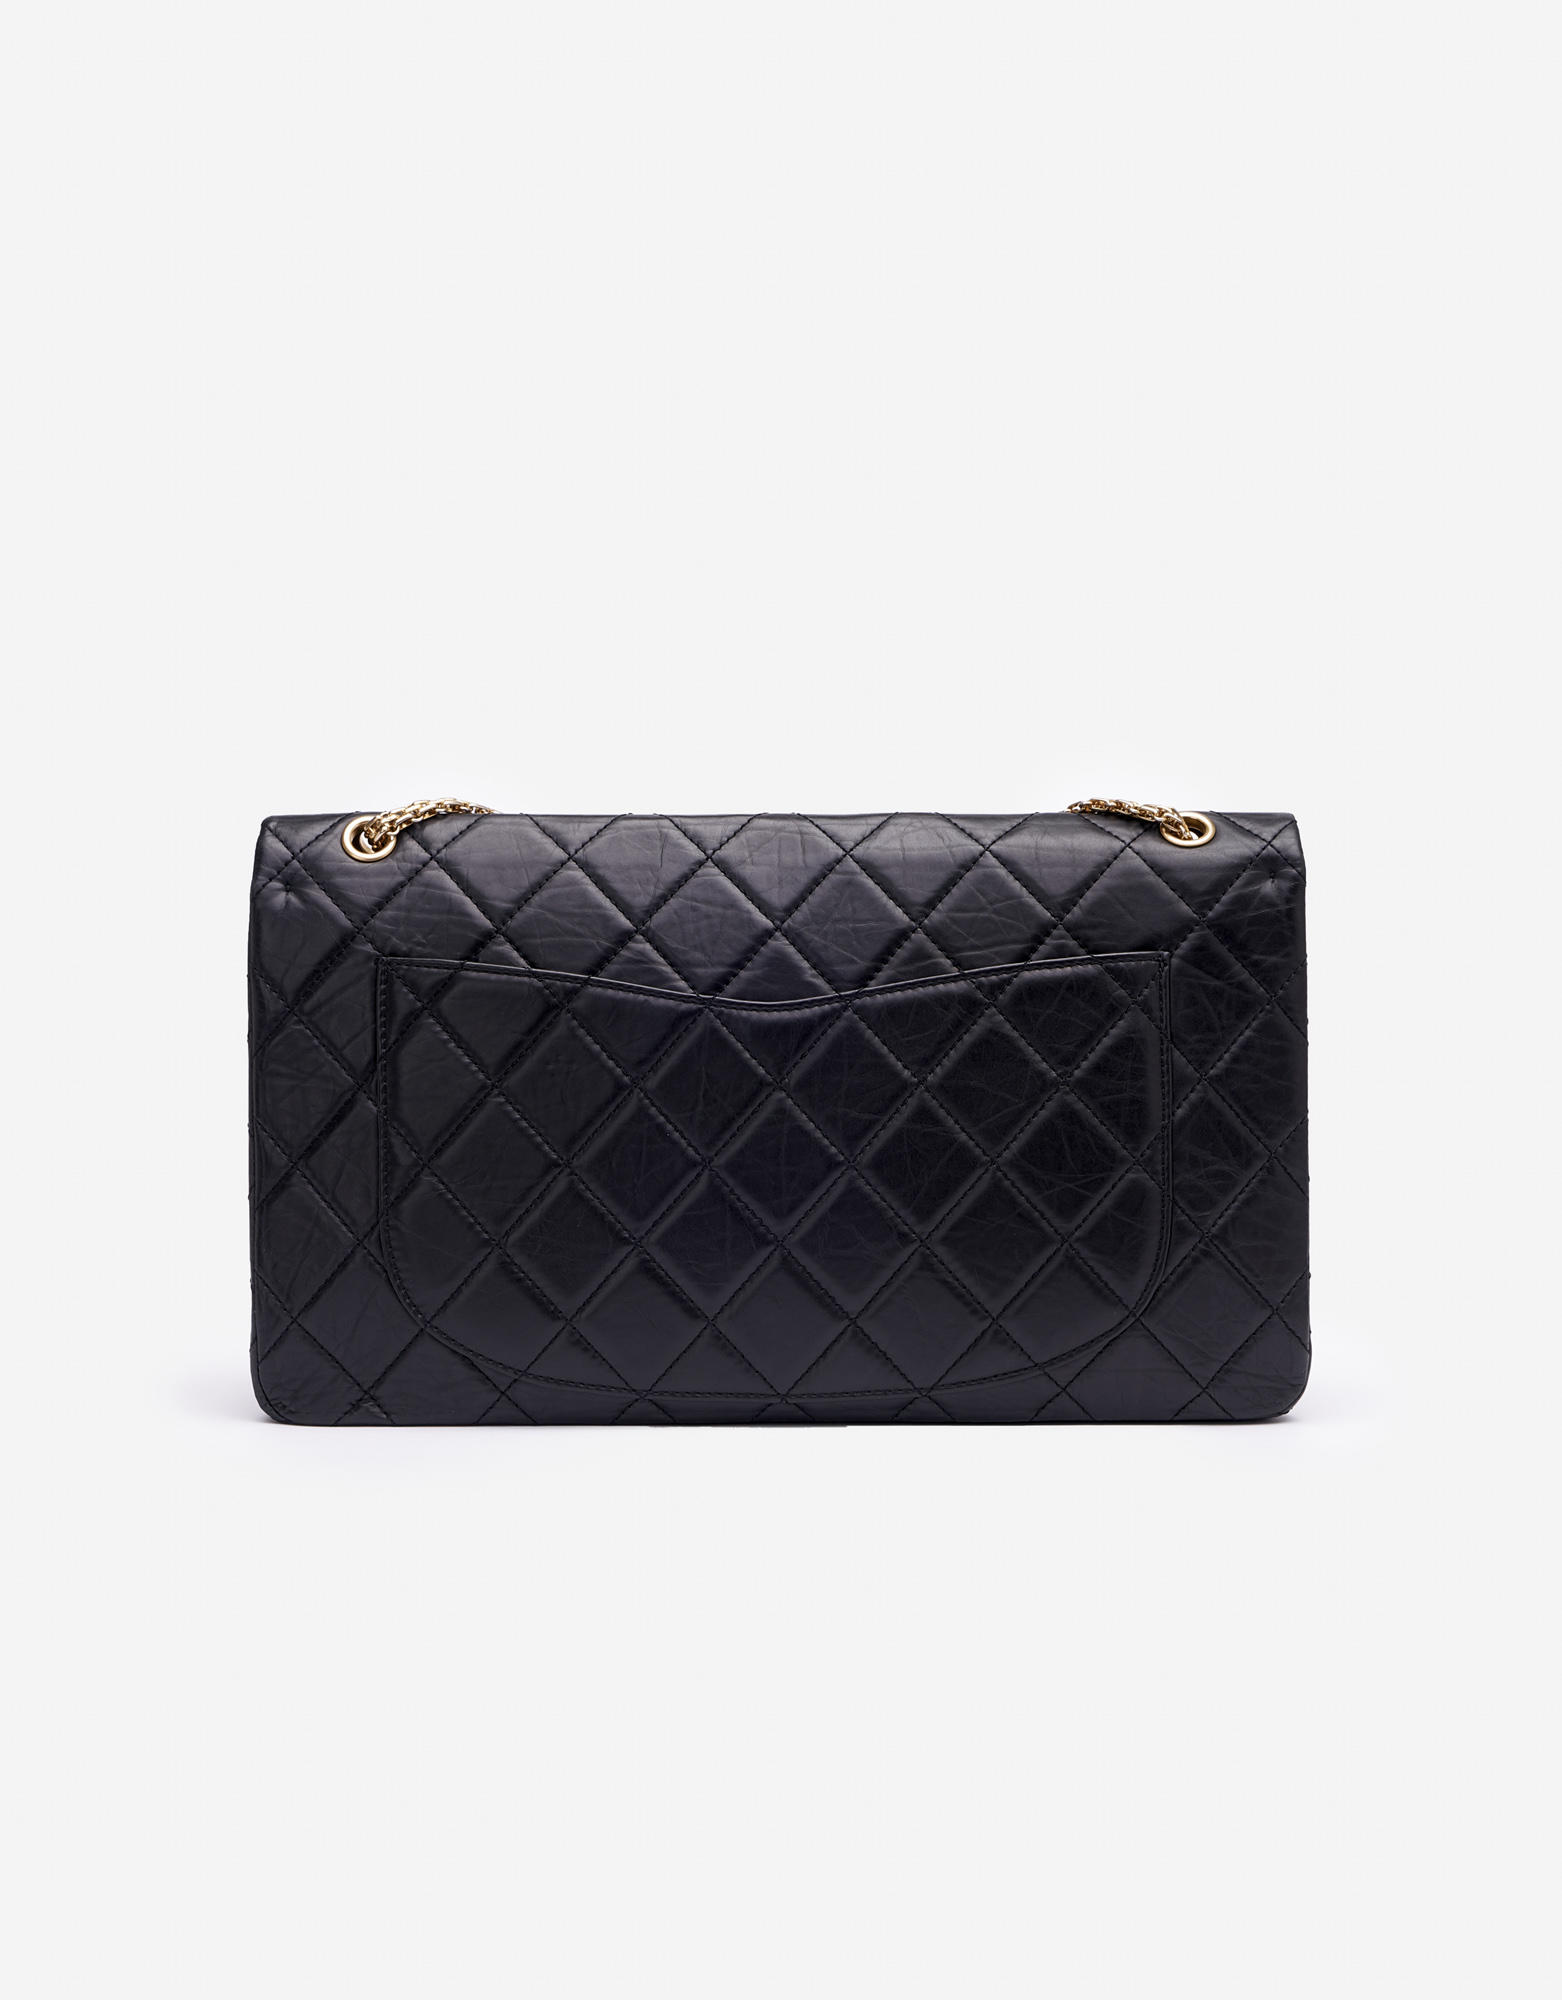 Chanel Timeless Classic 2.55 Jumbo Double Flap Bag in Black